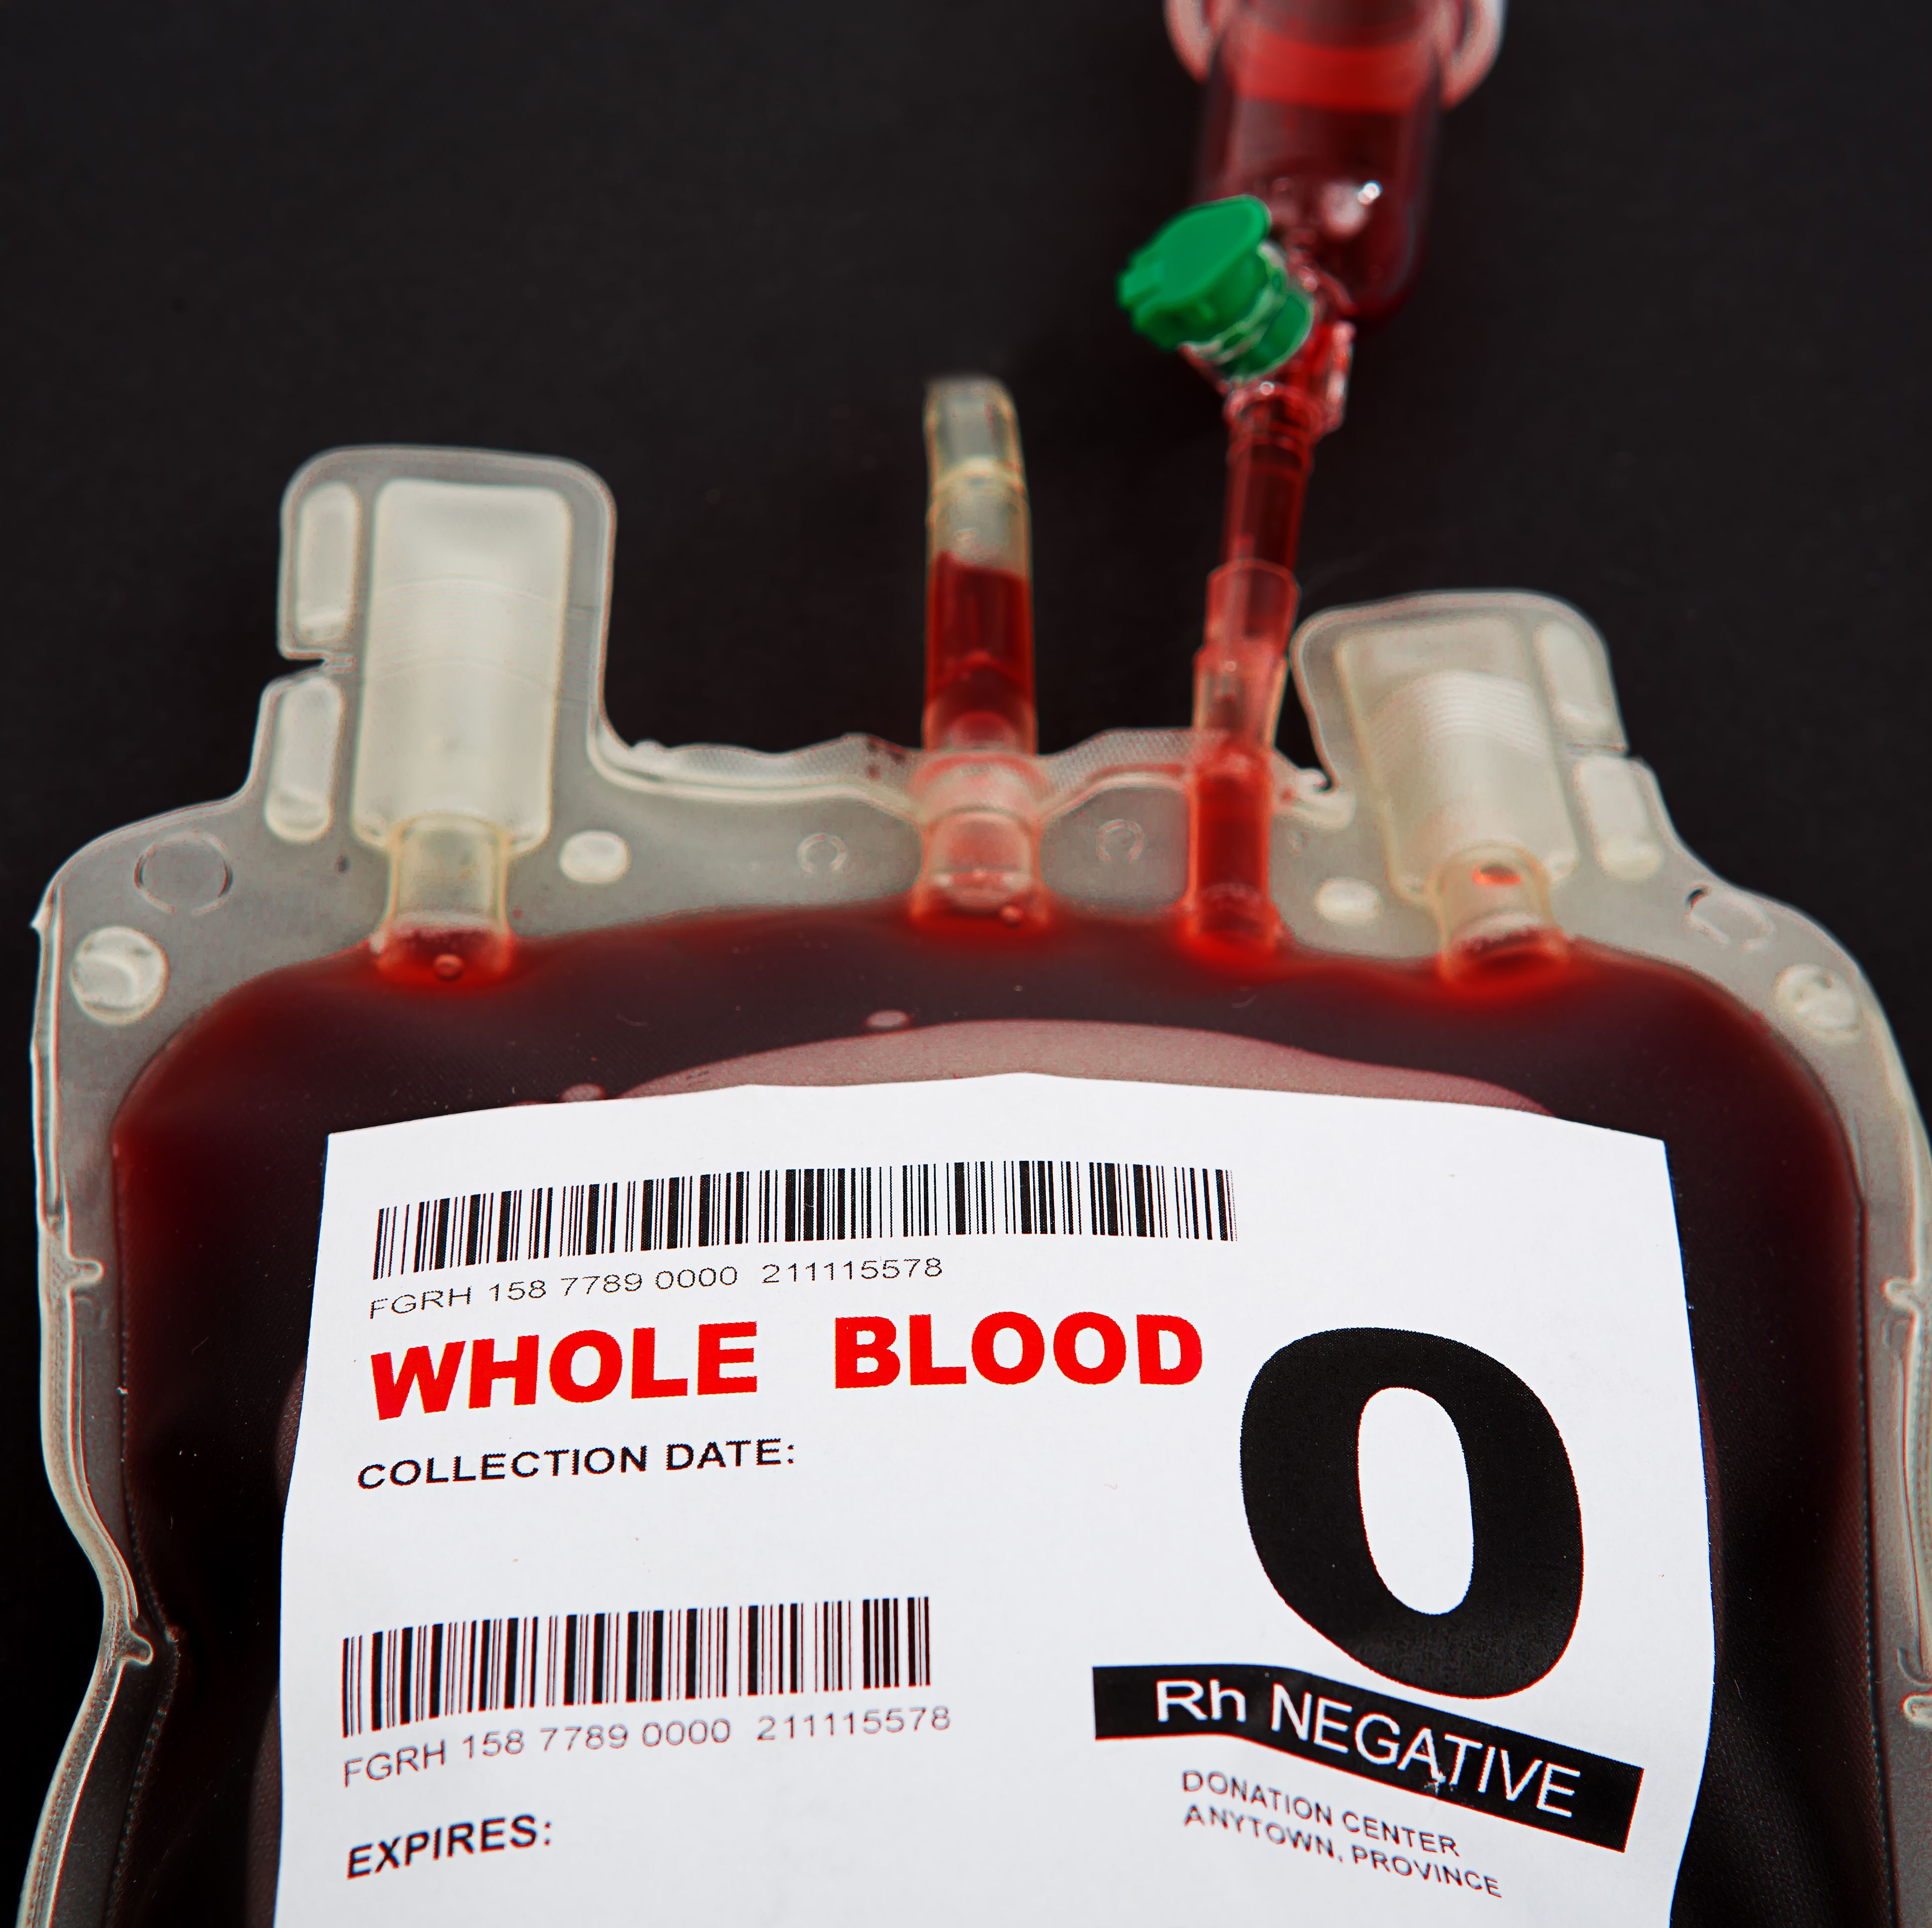 This Startup Claimed Its Blood Transfusions Could Reverse Aging. Then, the FDA Stepped In